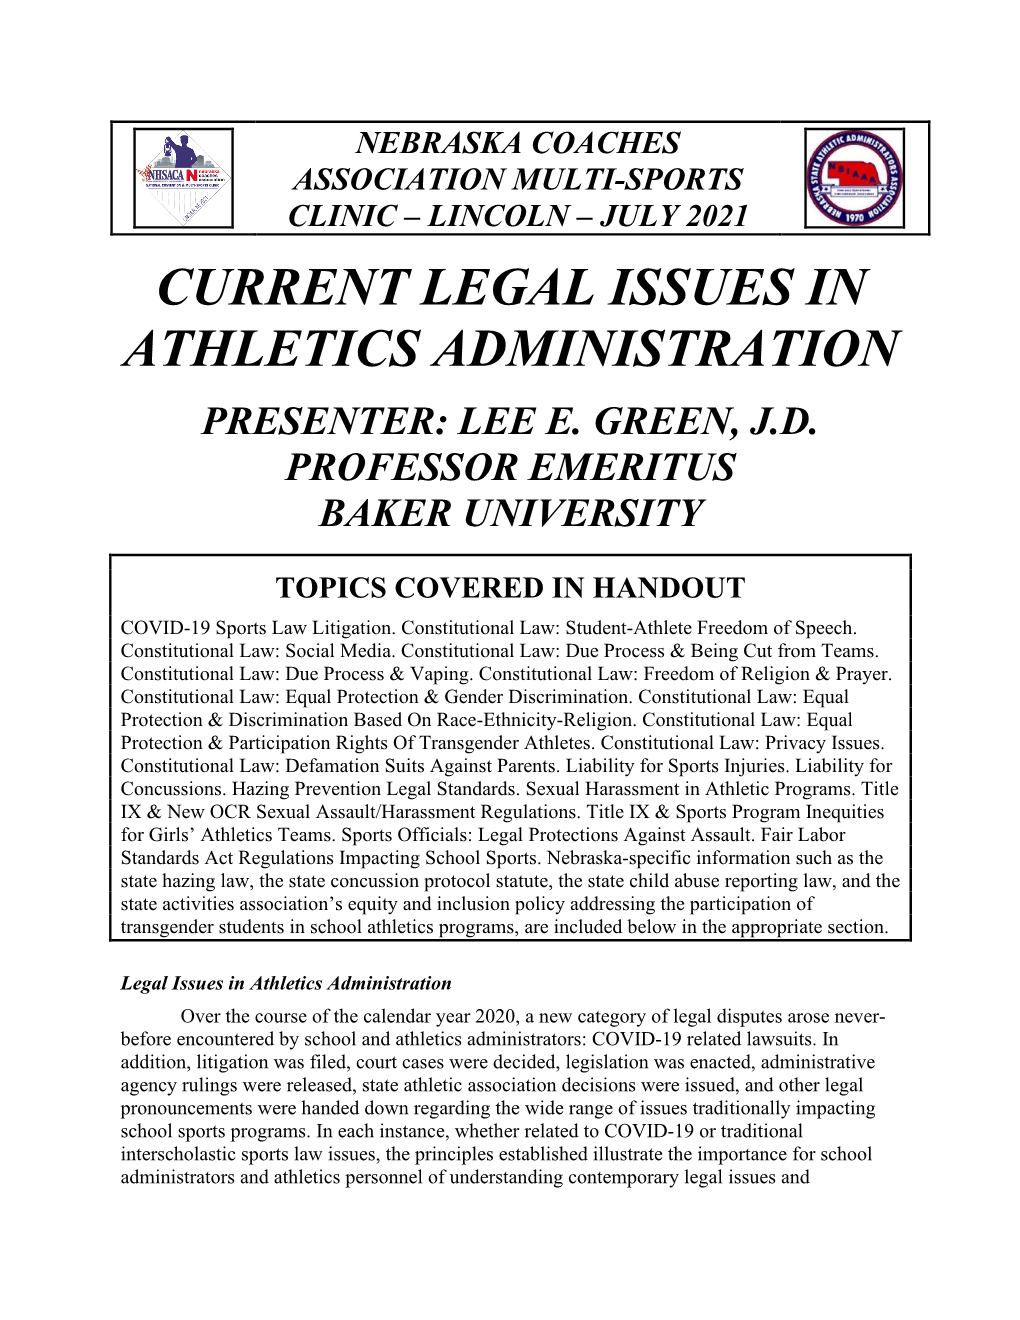 Current Legal Issues in Athletics Administration